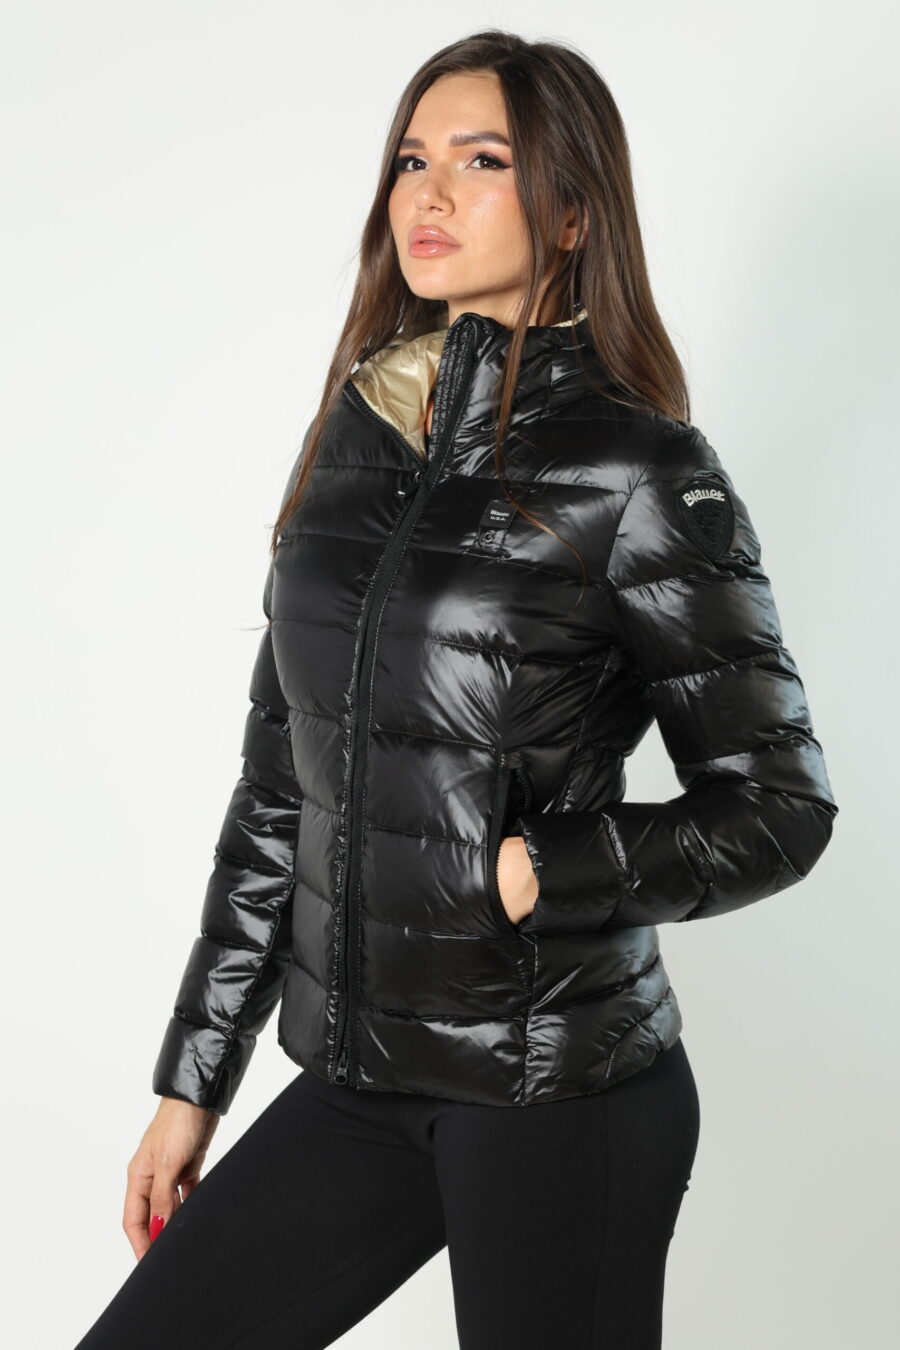 Black hooded jacket with straight lines with beige interior and logo patch - 8052865435499 237 scaled